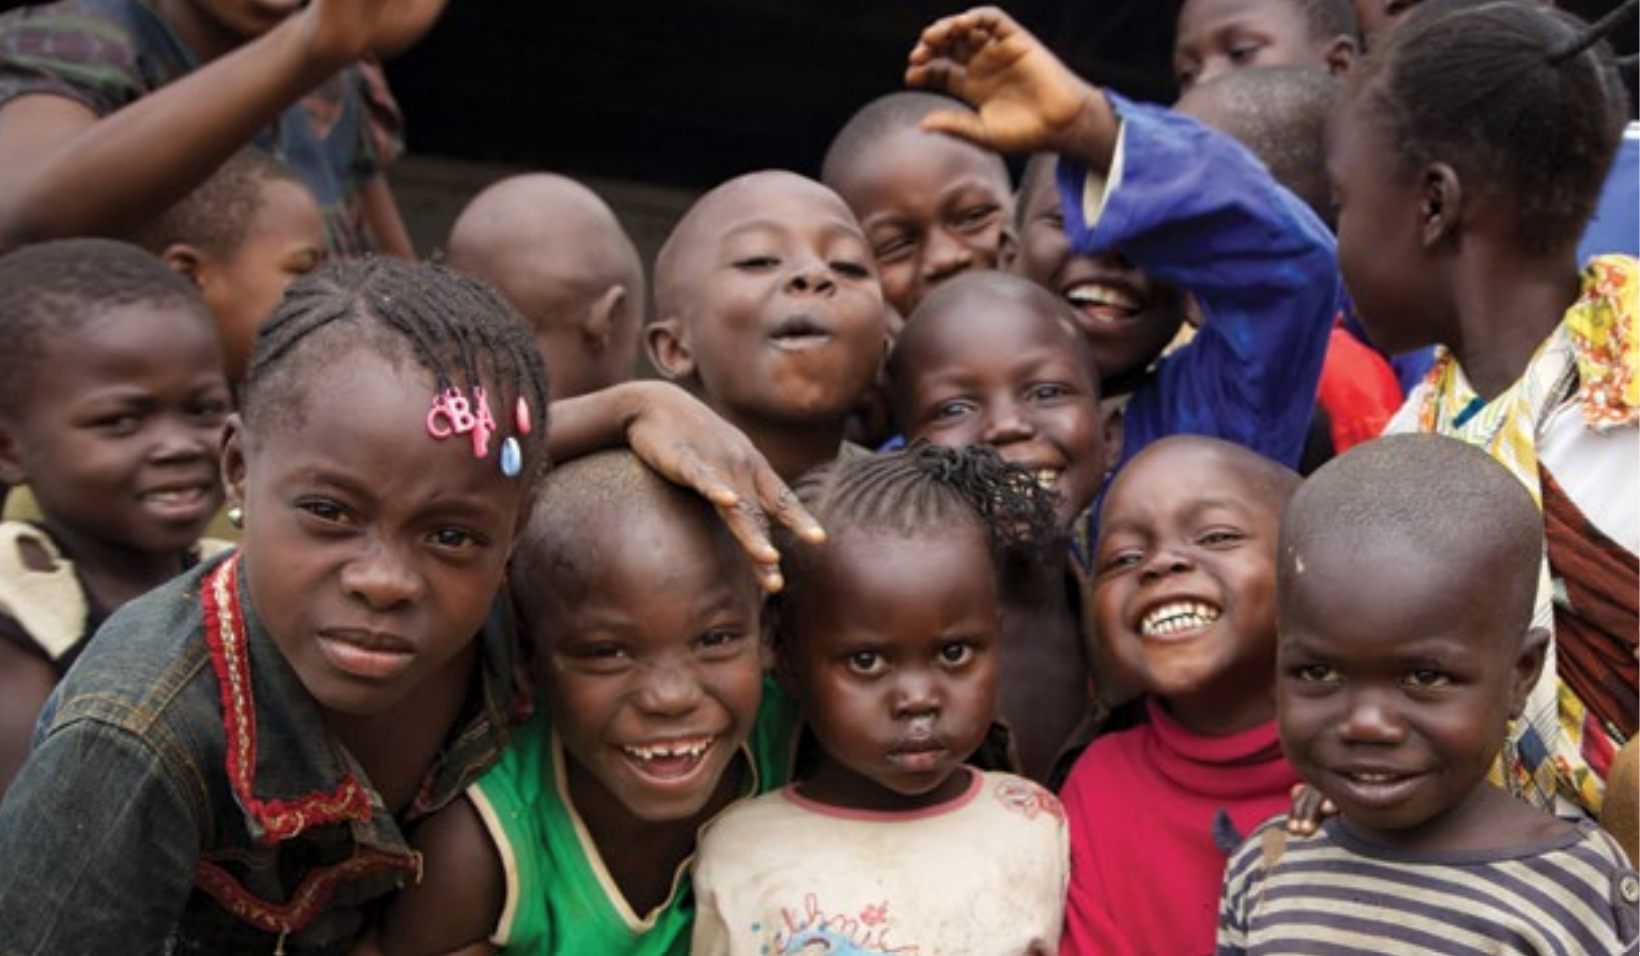 Group of children smile at the camera